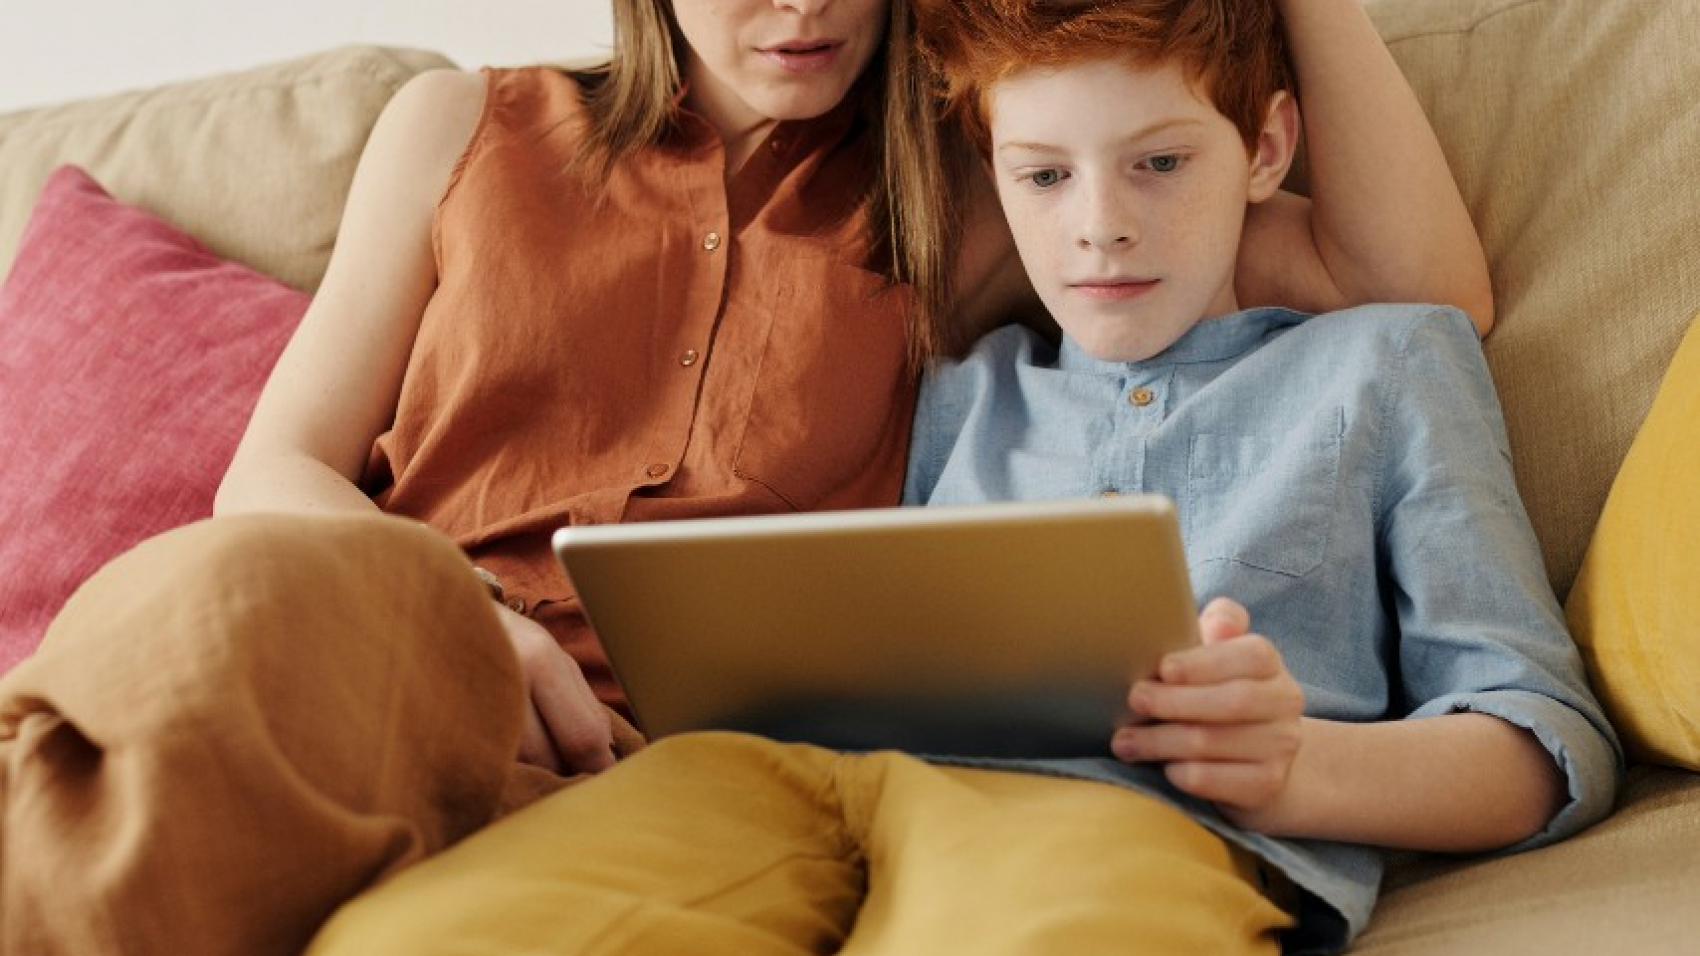 A parent sits beside her son on the couch as he looks at a tablet.